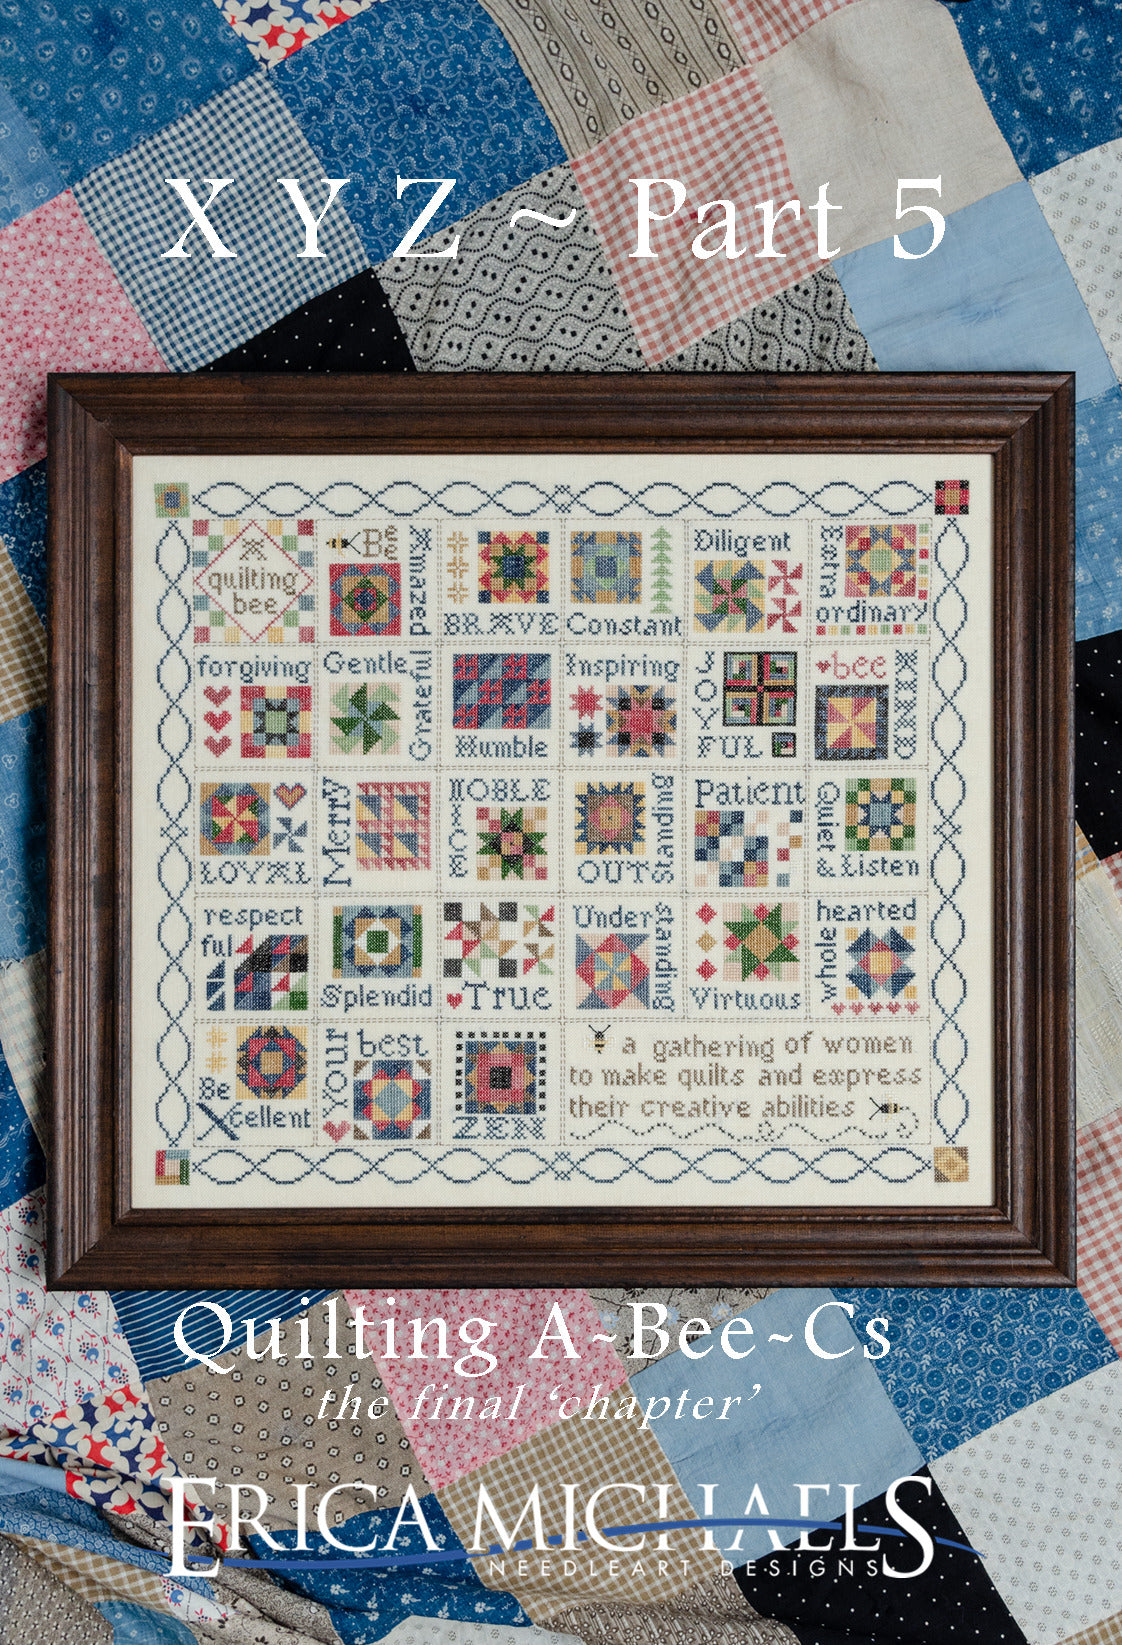 Quilting A -Bee-Cs Part 5 by Erica Michaels